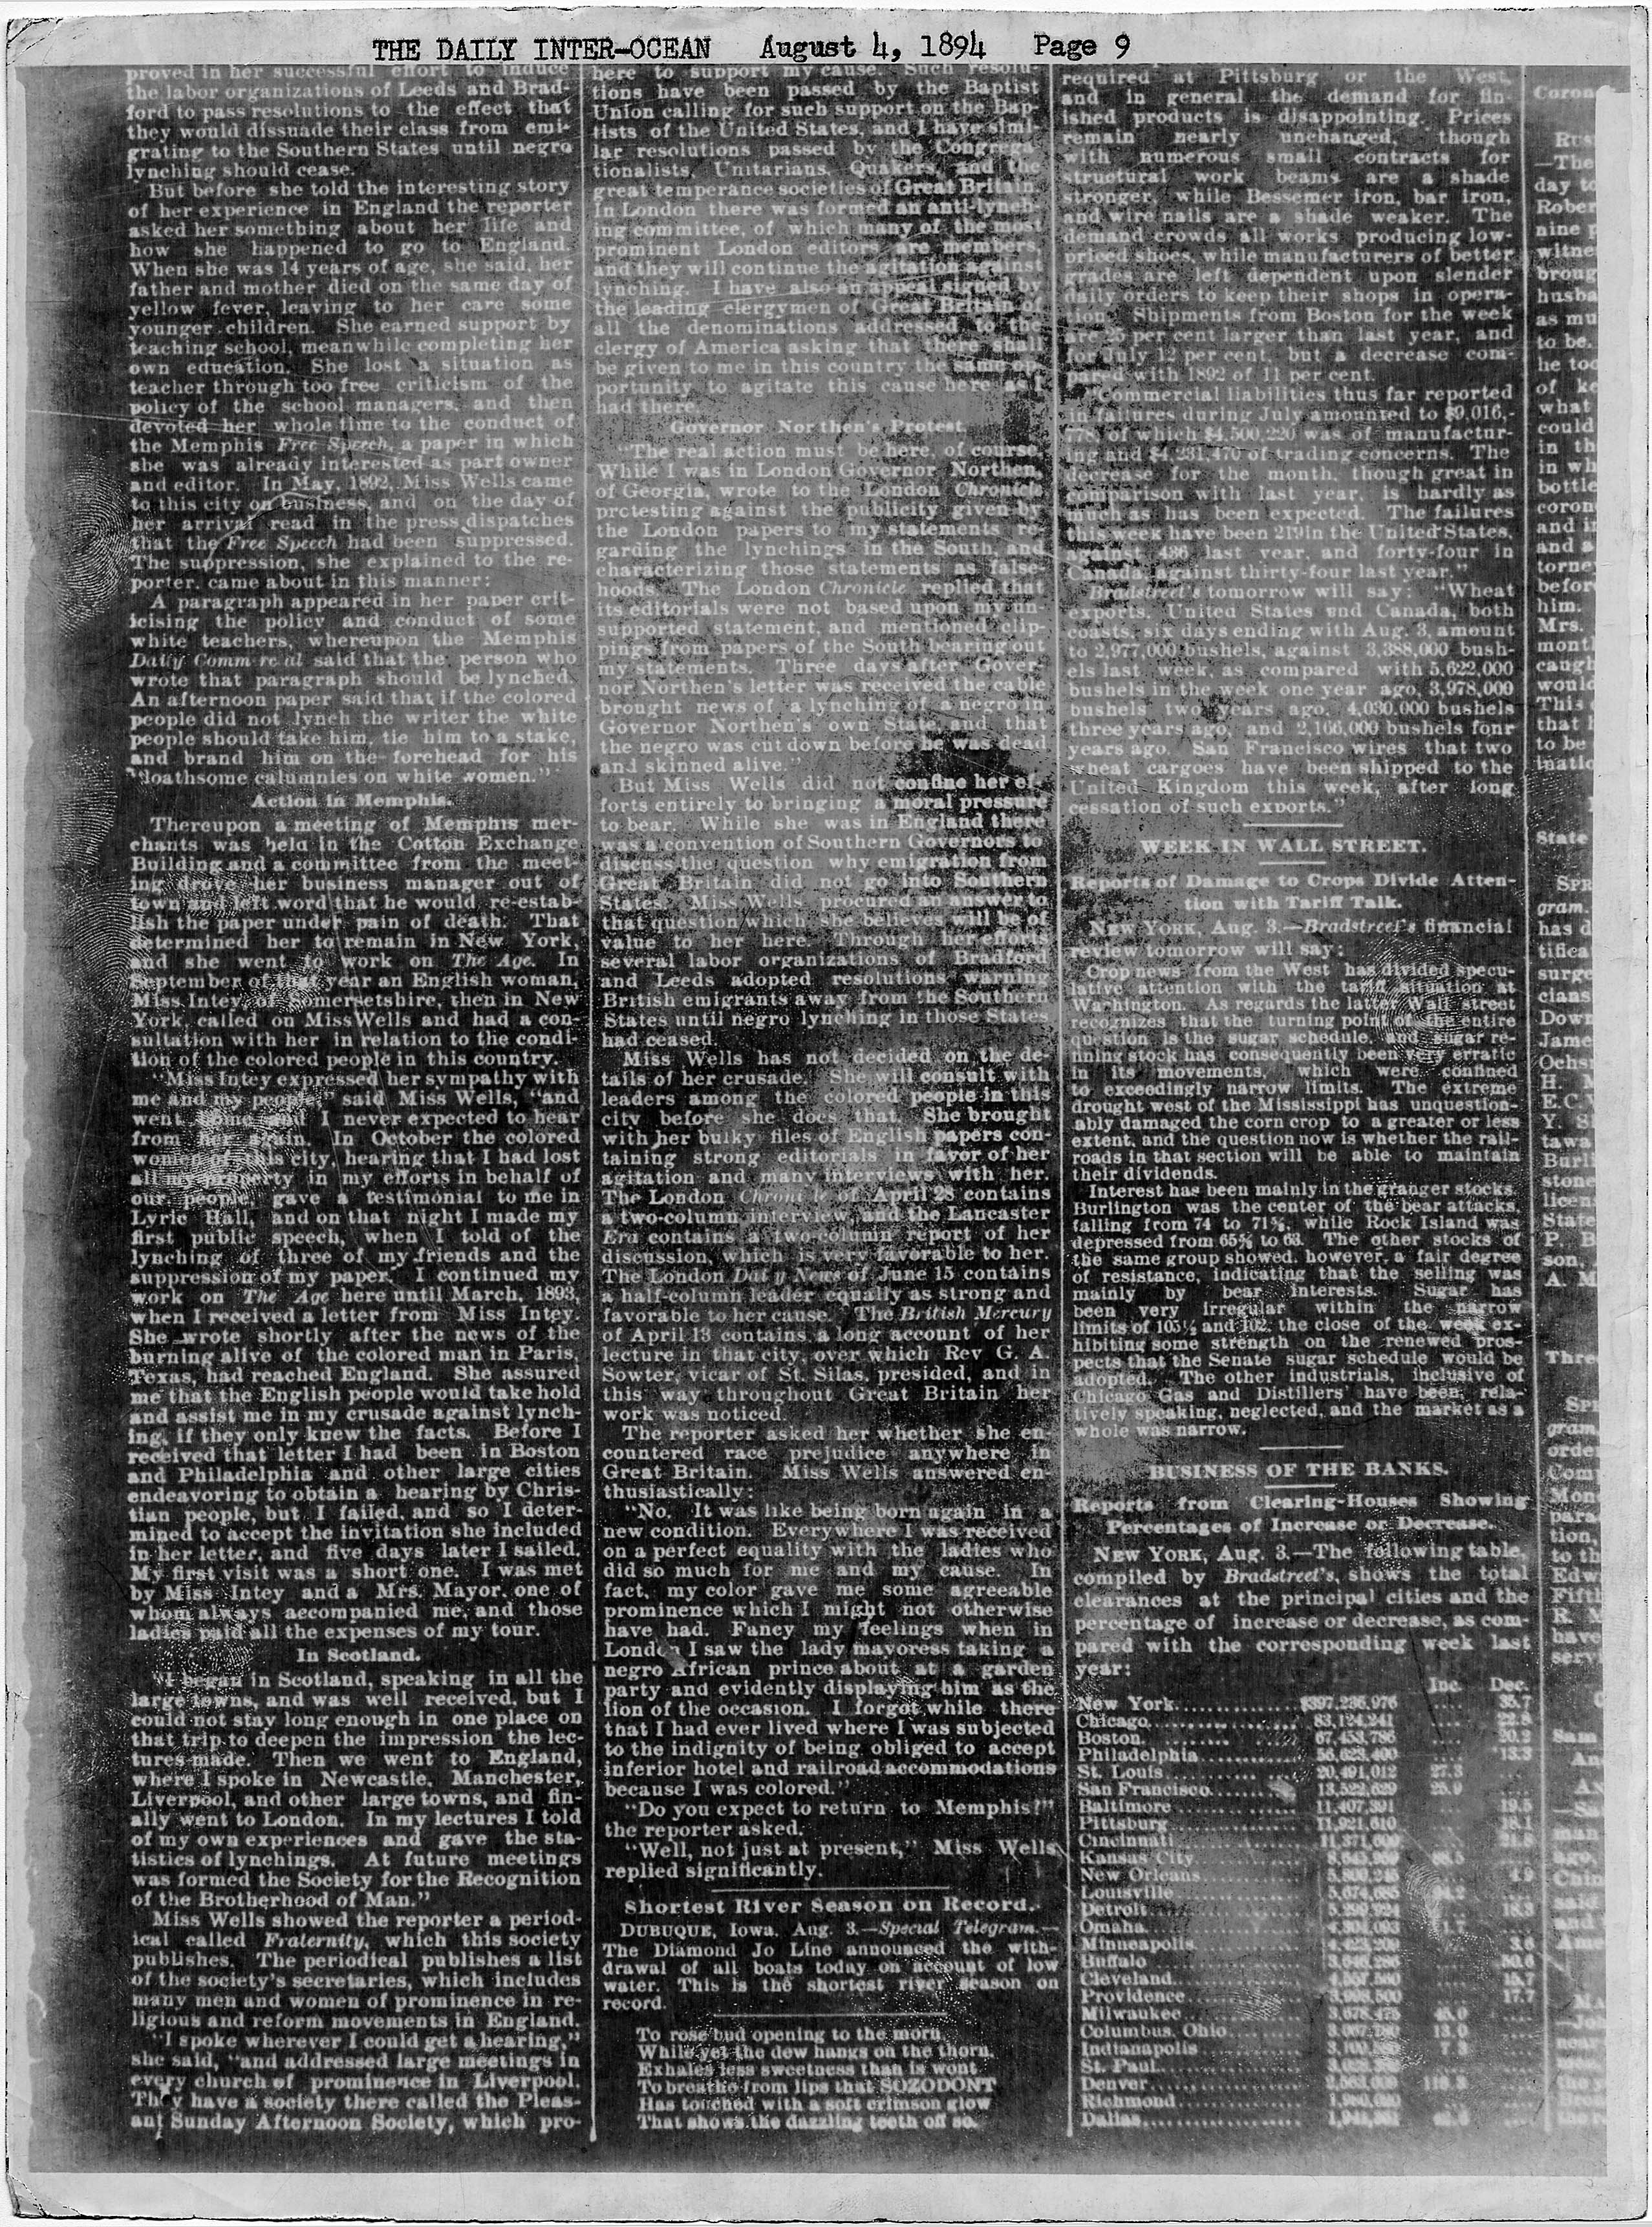 "Against Lynching: Ida B. Wells and her Recent Mission in England." The Daily Inter-Ocean, August 4, 1894, photocopy, page 1